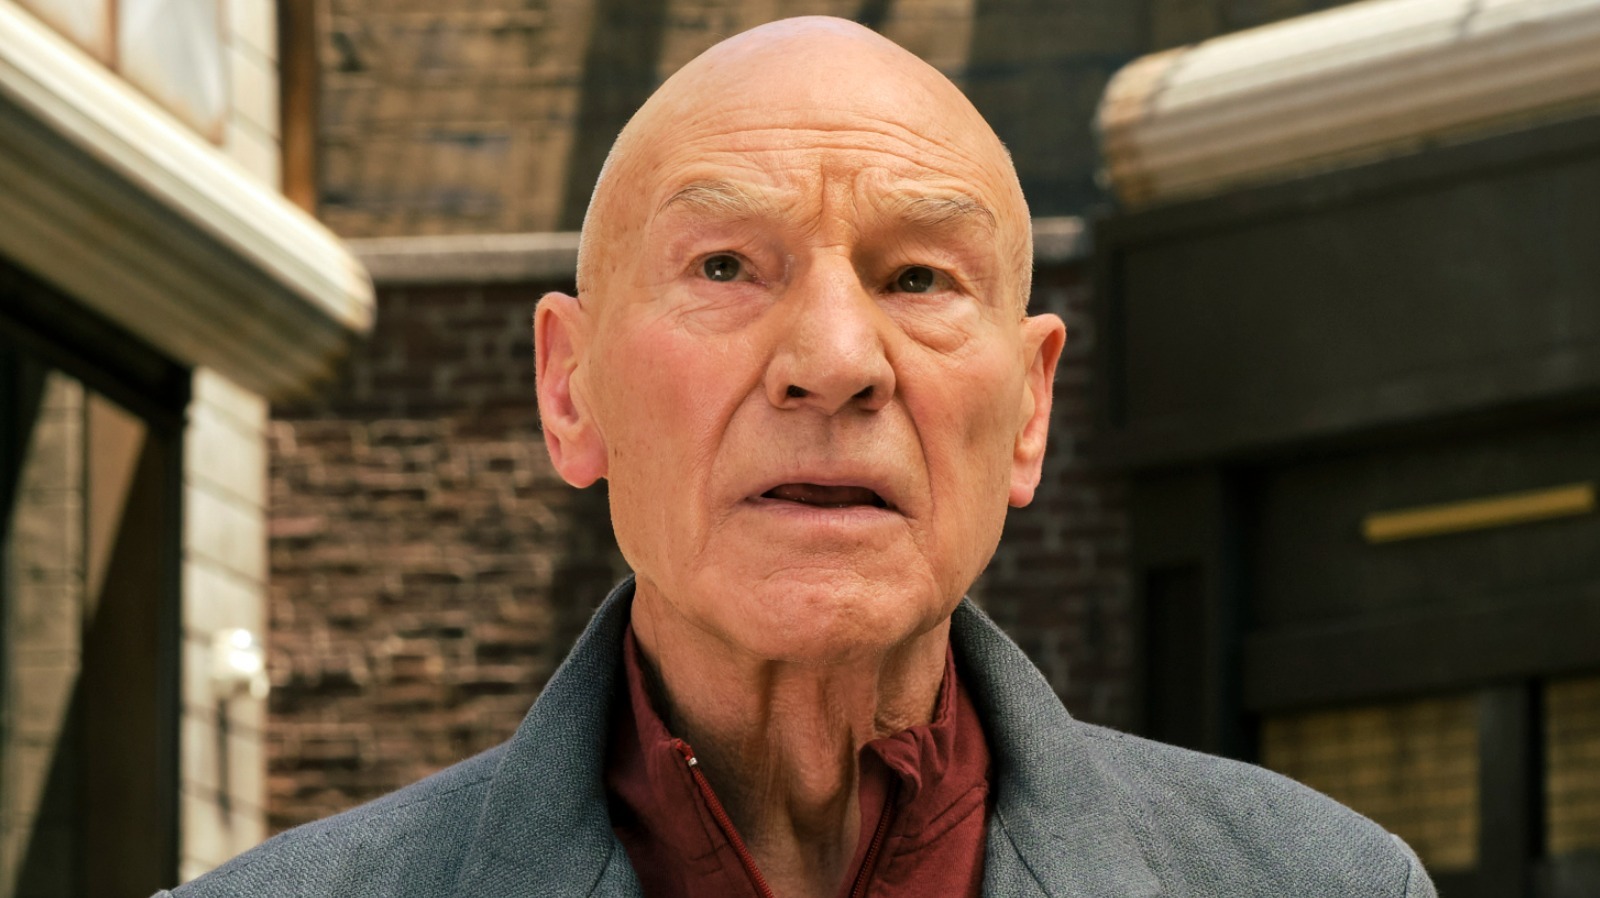 picard funny face